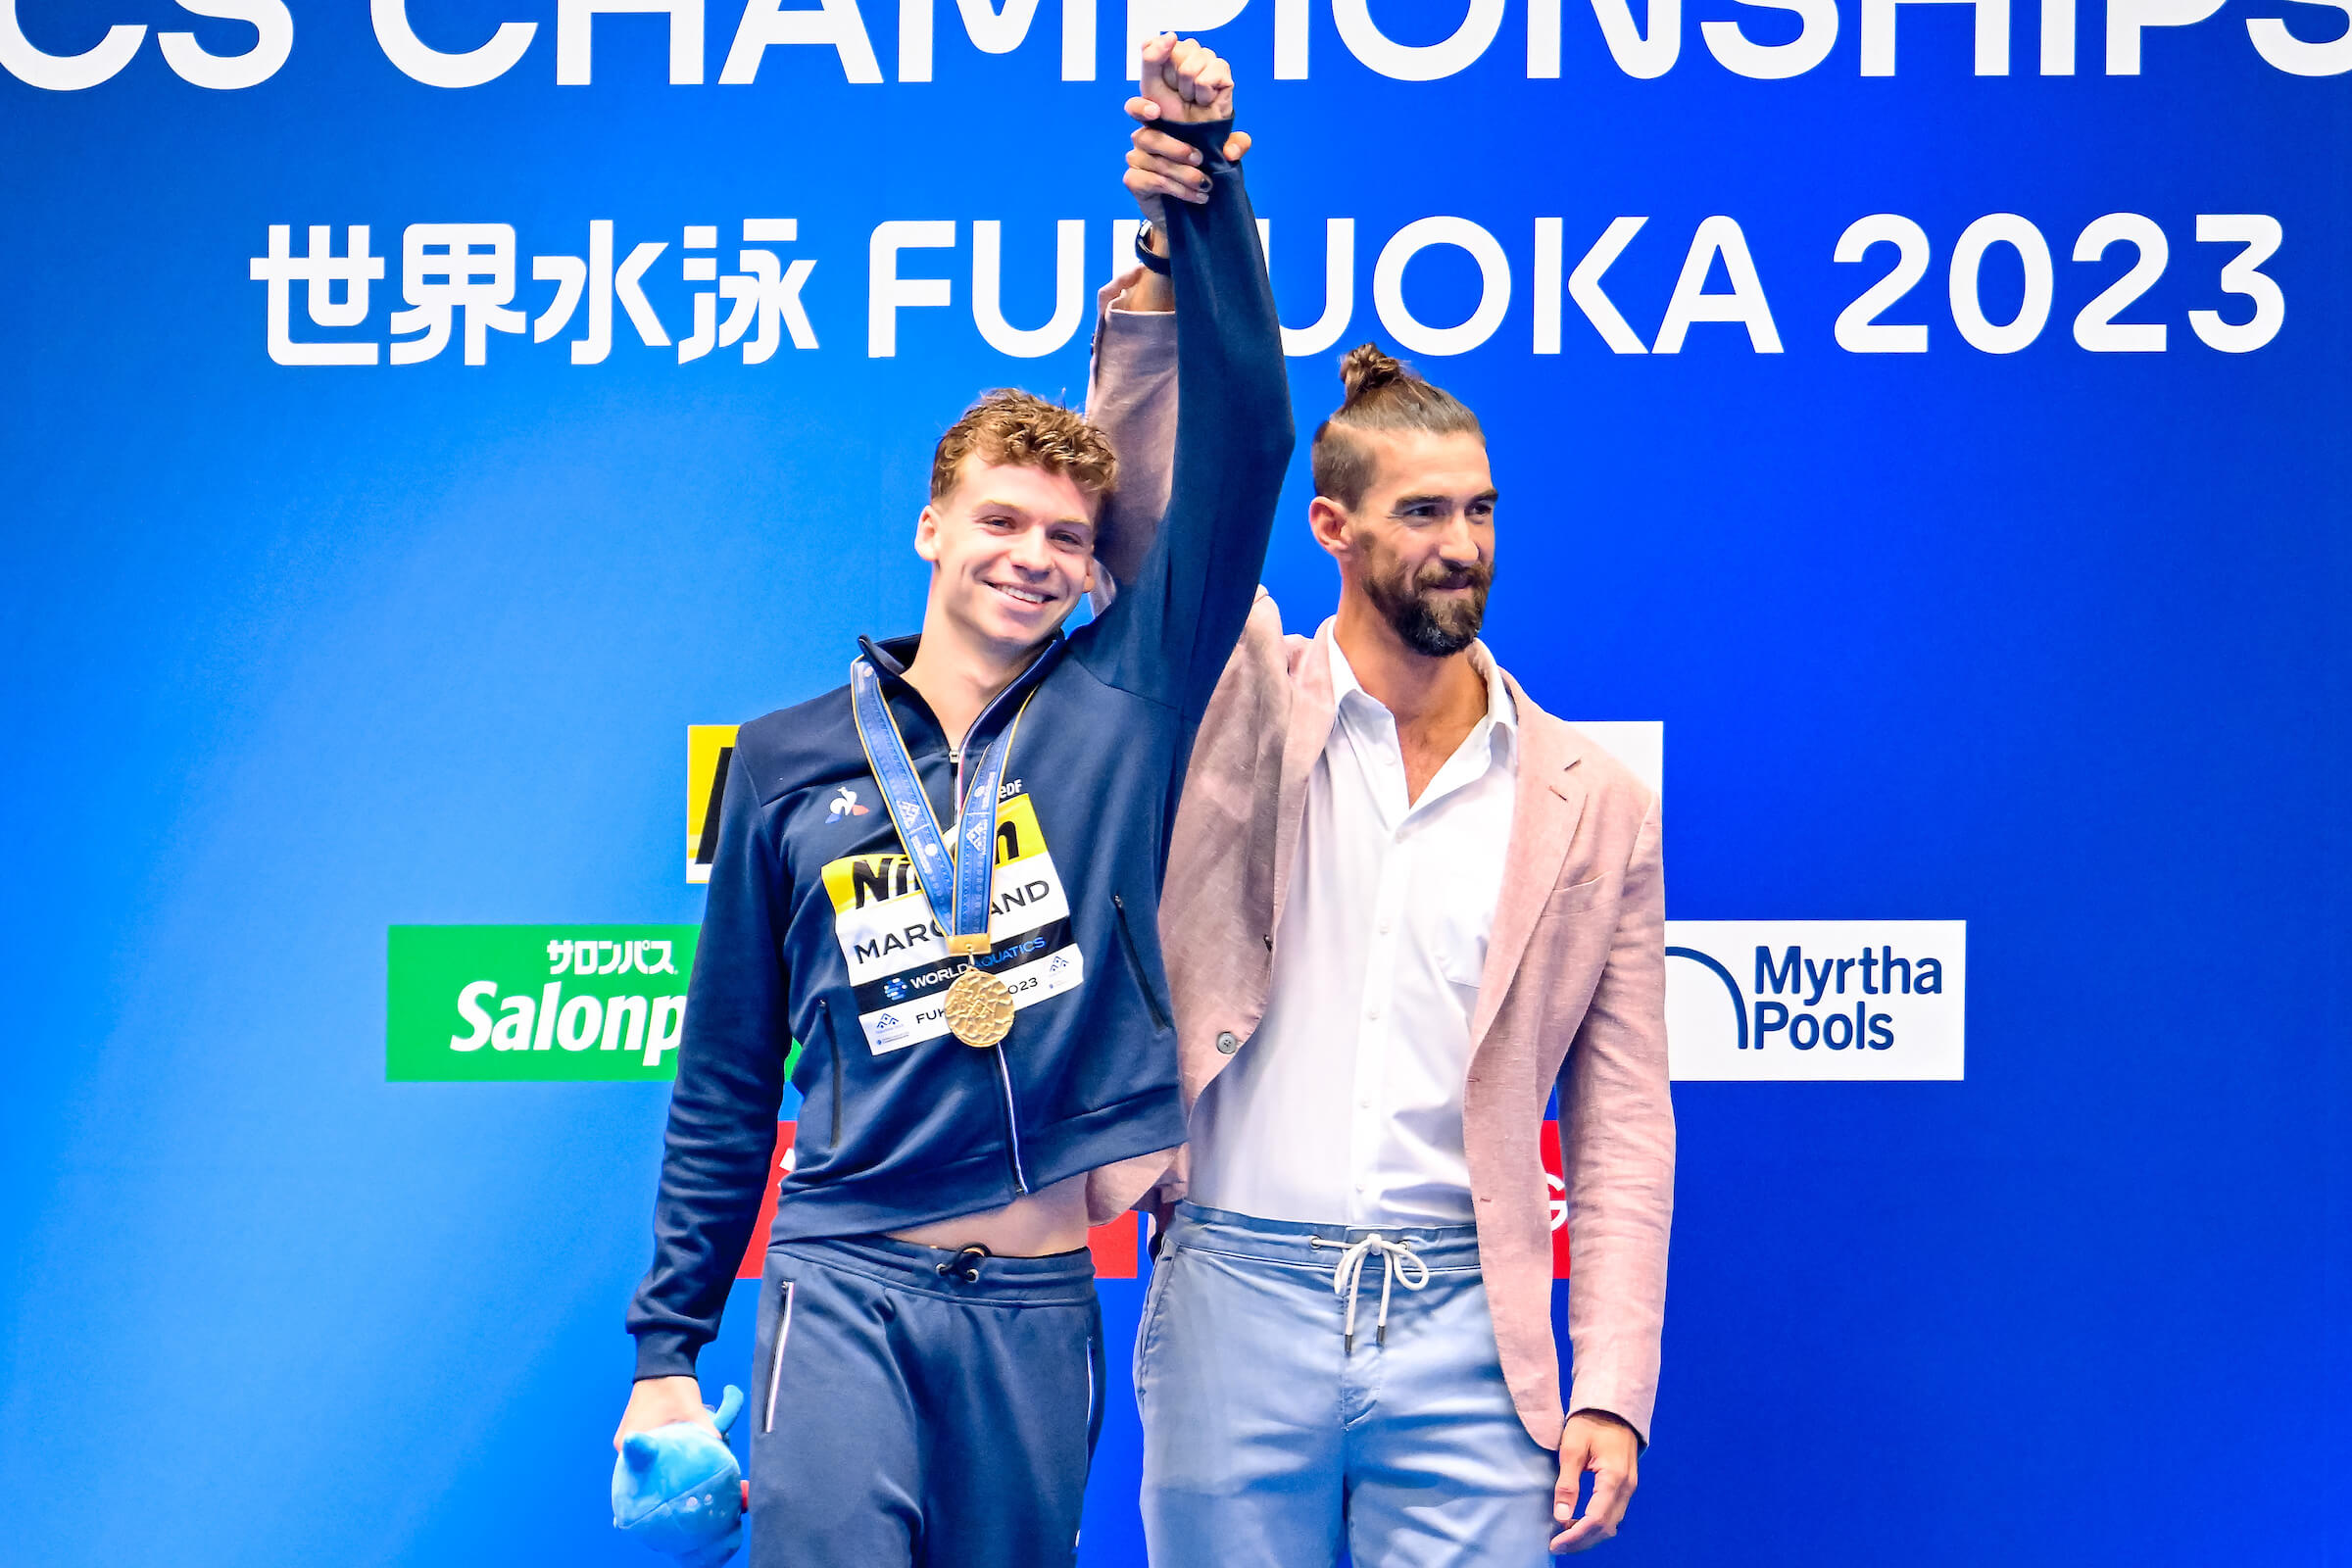 2023 Junior World Championships  Event Finals Day Two Live Blog